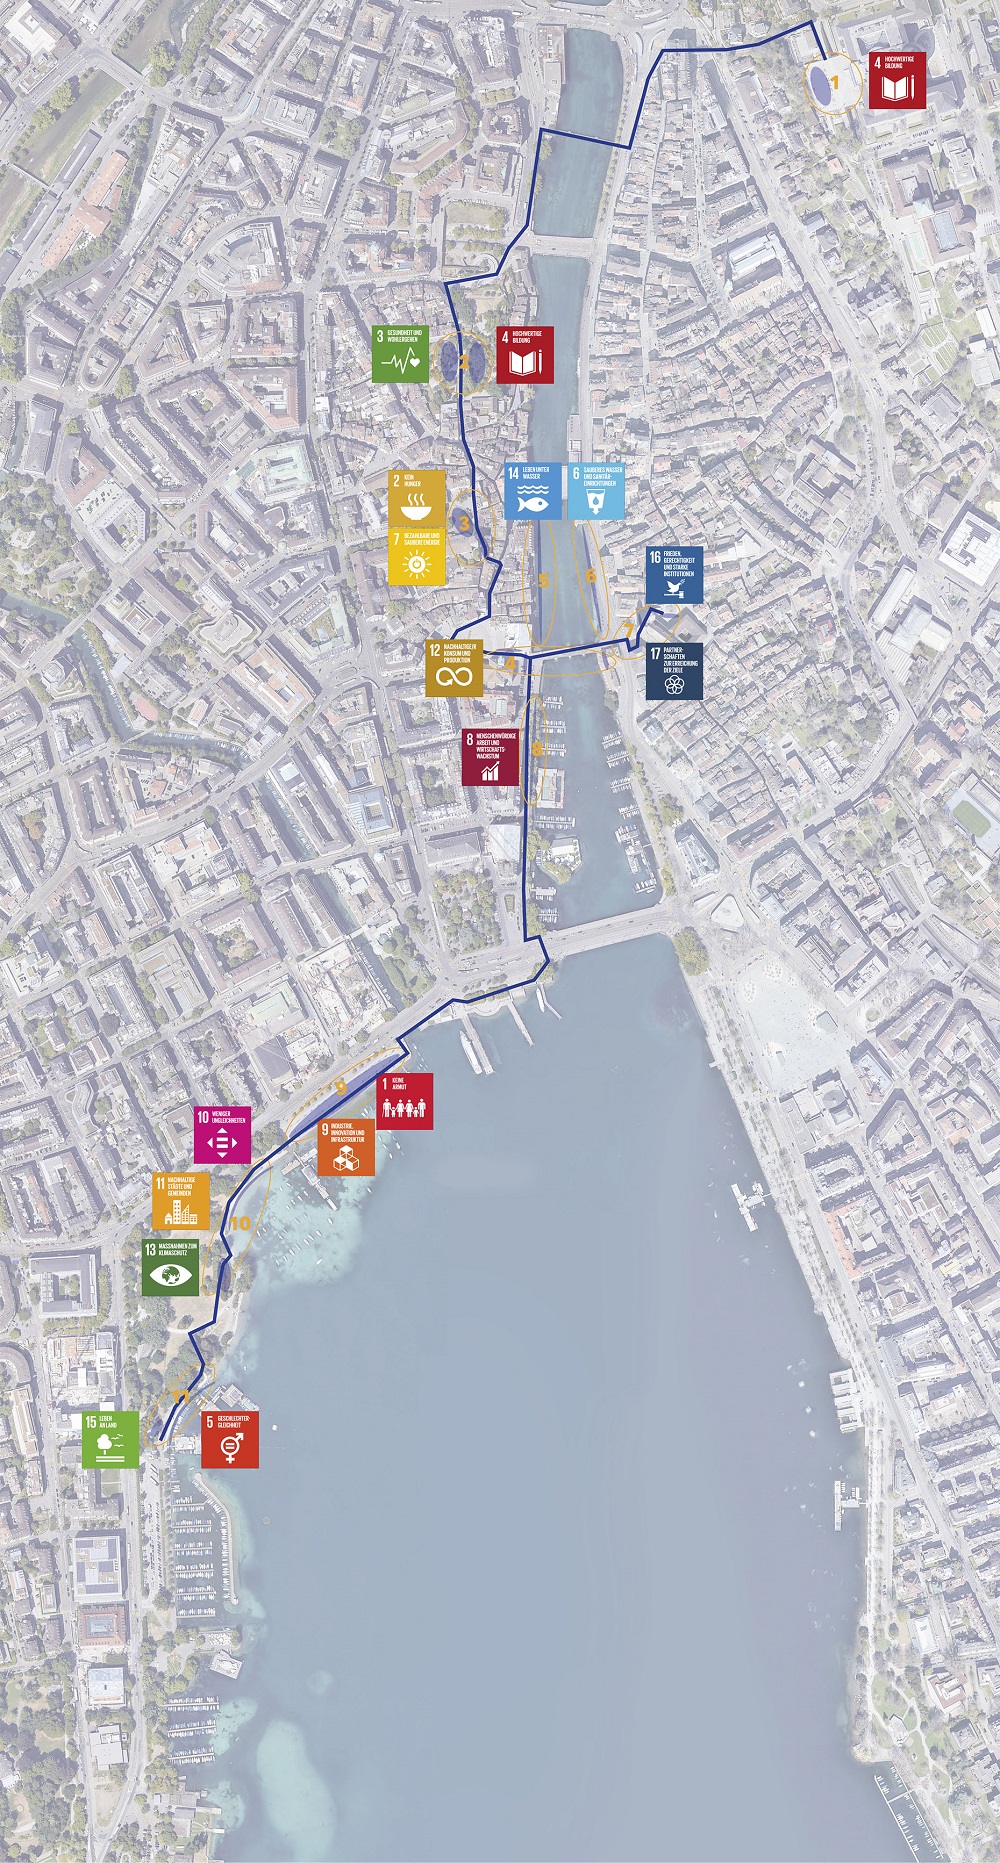 Route map of the open your eyes photo exhibition from ETH polyterrace through the Old Town to Seehafen Enge (3 km)